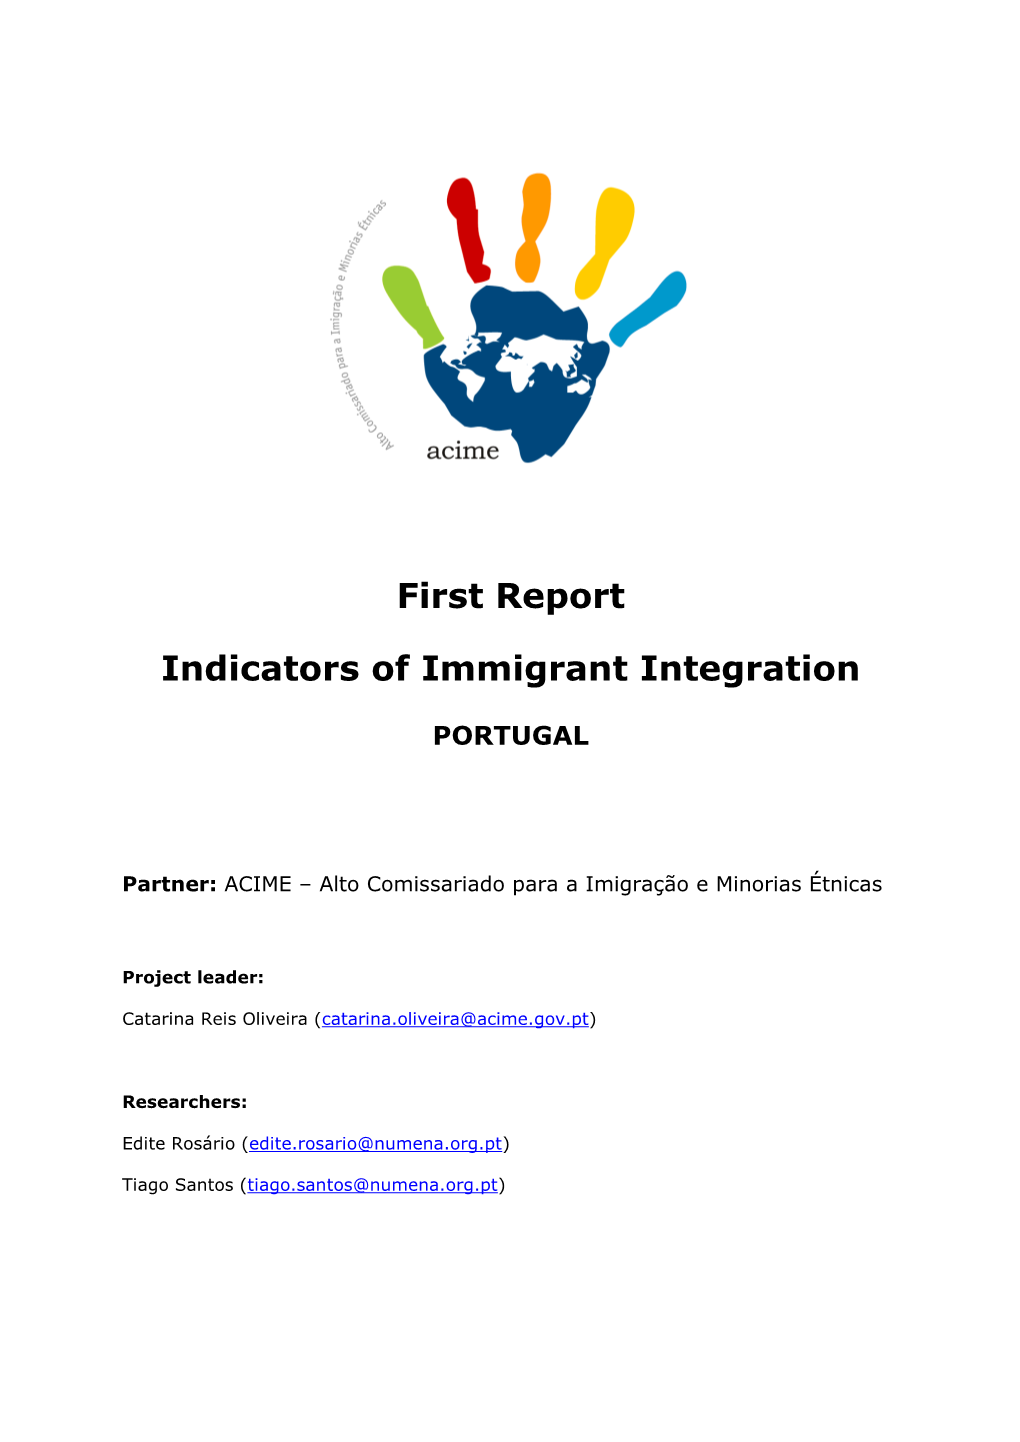 First Report Indicators of Immigrant Integration PORTUGAL